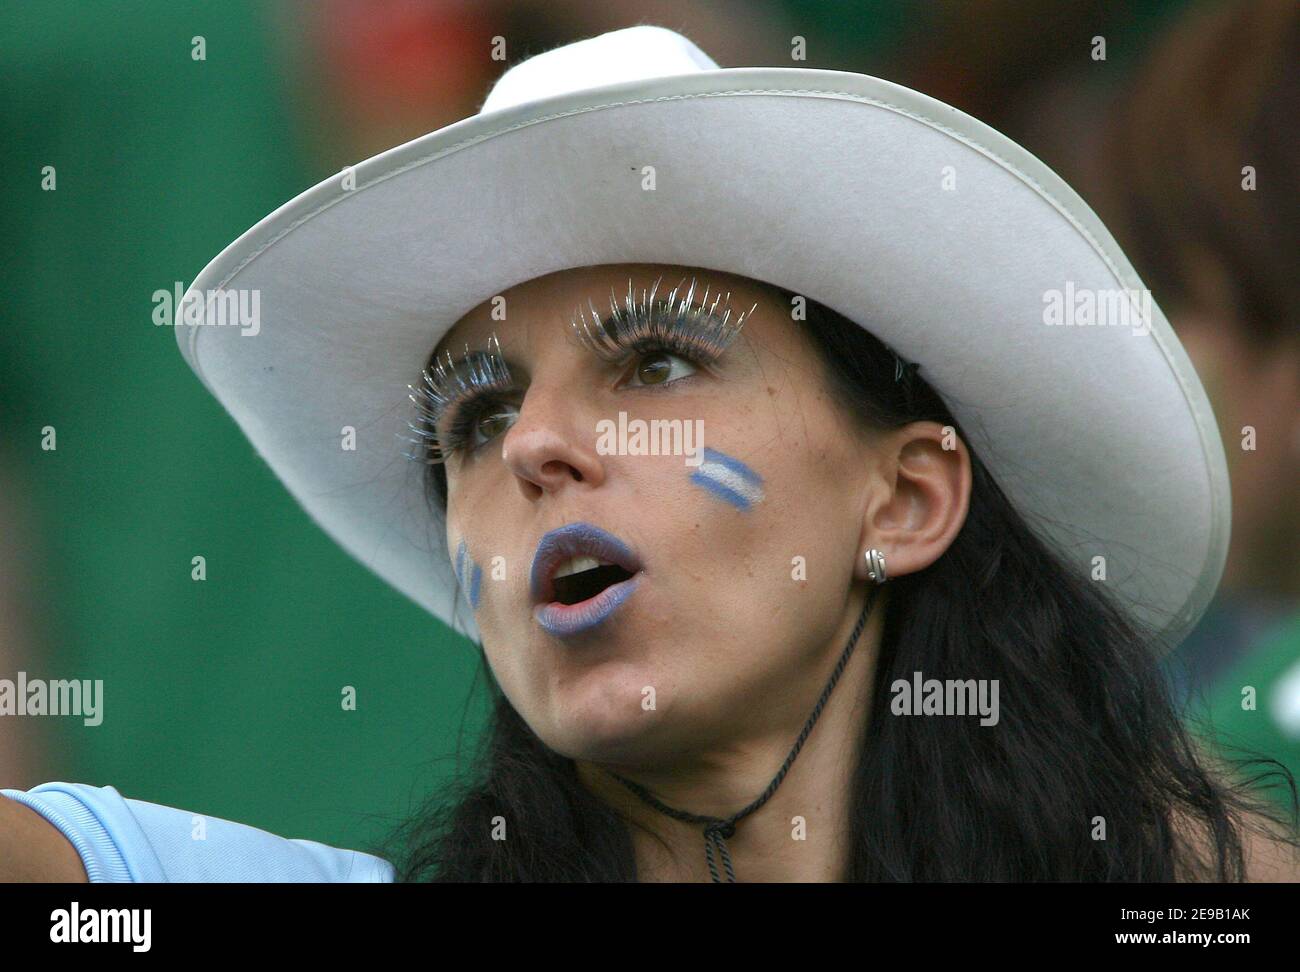 An Argentina's fan during the World Cup 2006, Second round, Argentina vs Mexico at the Zentralstadion stadium in Leipzig, Germany on June 24, 2006. Argentina won 2-1. Photo by Gouhier-Hahn-Orban/Cameleon/ABACAPRESS.COM Stock Photo